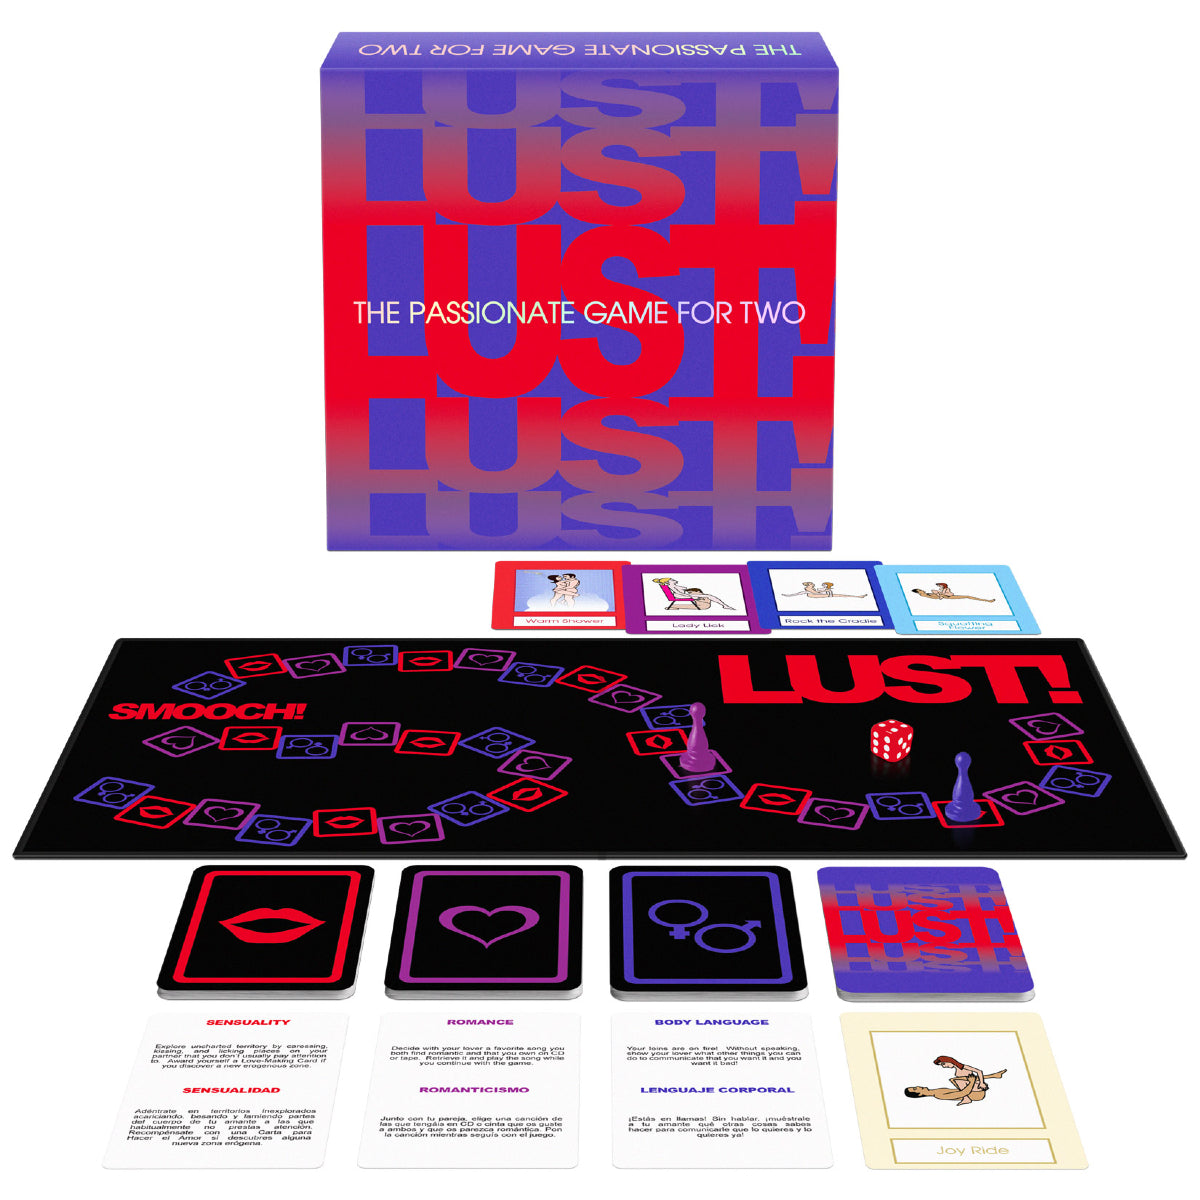 The Lust Board Game allows you and your partner to create a sexual fantasy as you navigate around the board, building up your sexual tension, as you can't act fully out your fantasy until the end of the game!